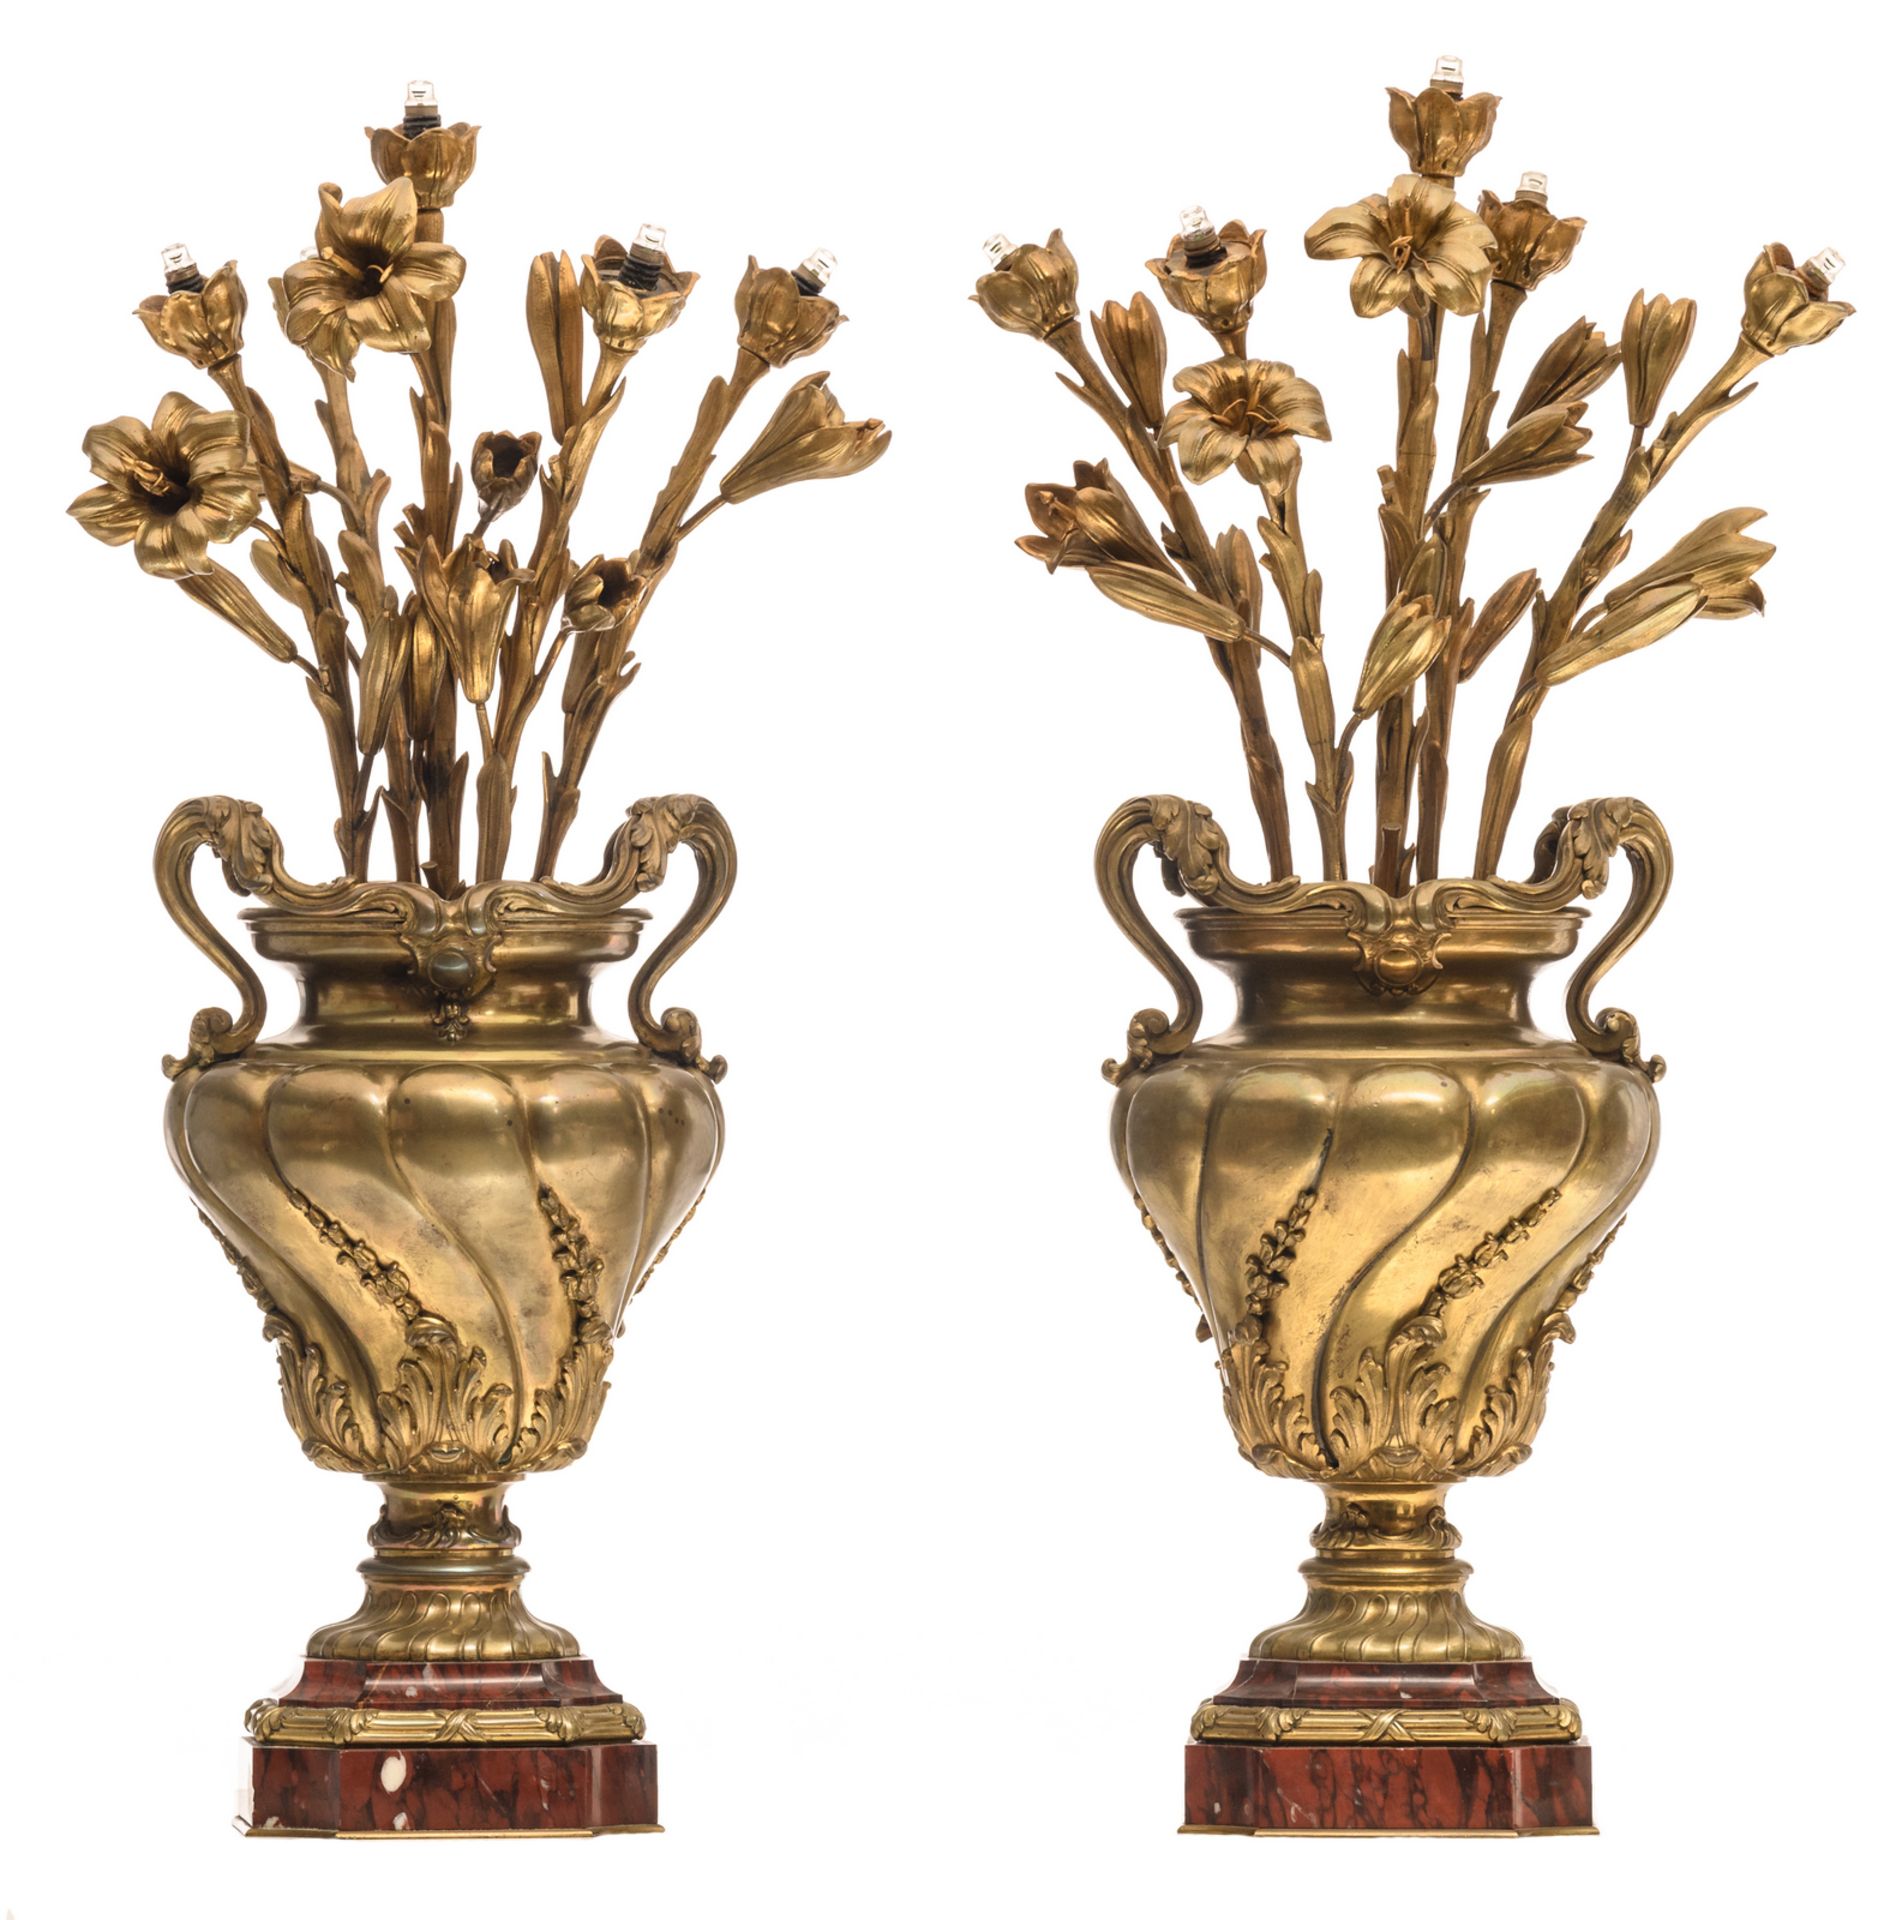 Two Belle Époque table lamps in the shape of a vase with a bouquet, bronze on a marble base, H 70